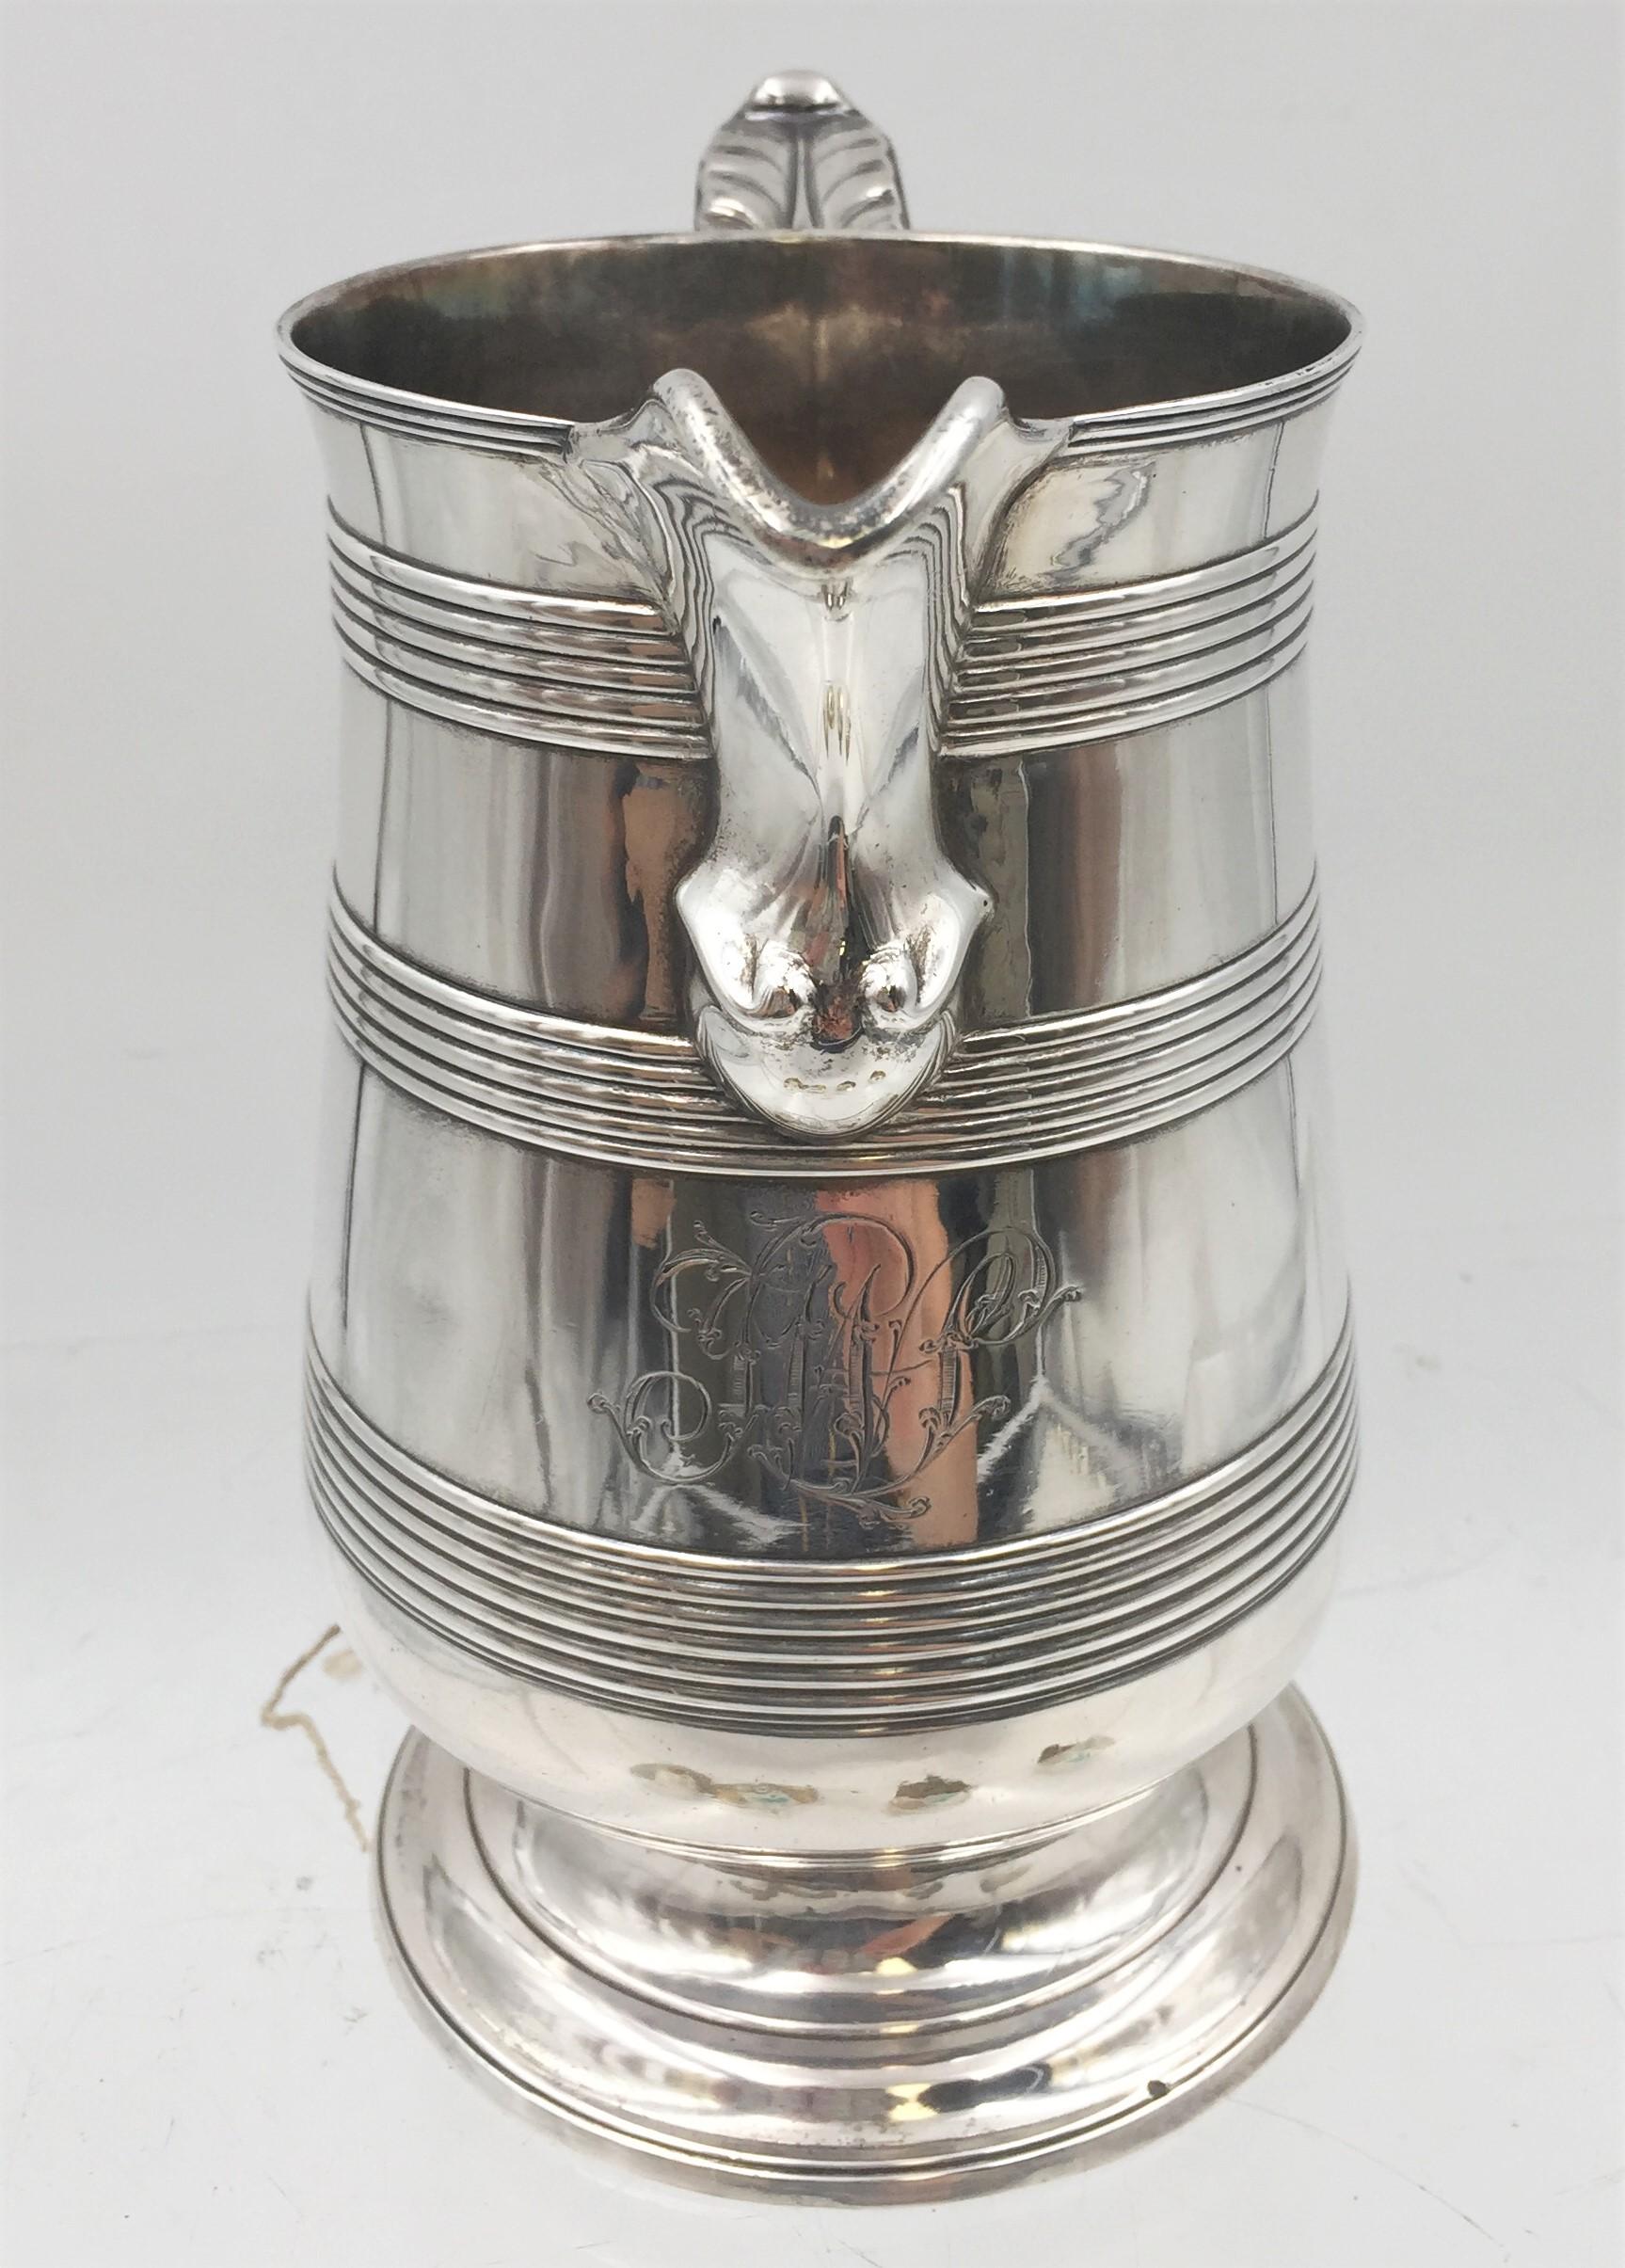 English sterling silver spouted beer jug pitcher by Peter and Ann Bateman from 1796 with applied bands and ribbon-bound reeded handle, measuring 7'' in height by 7 1/2'' from handle to spout and weighing 21.3 ozt. Bearing a JWS monogram and